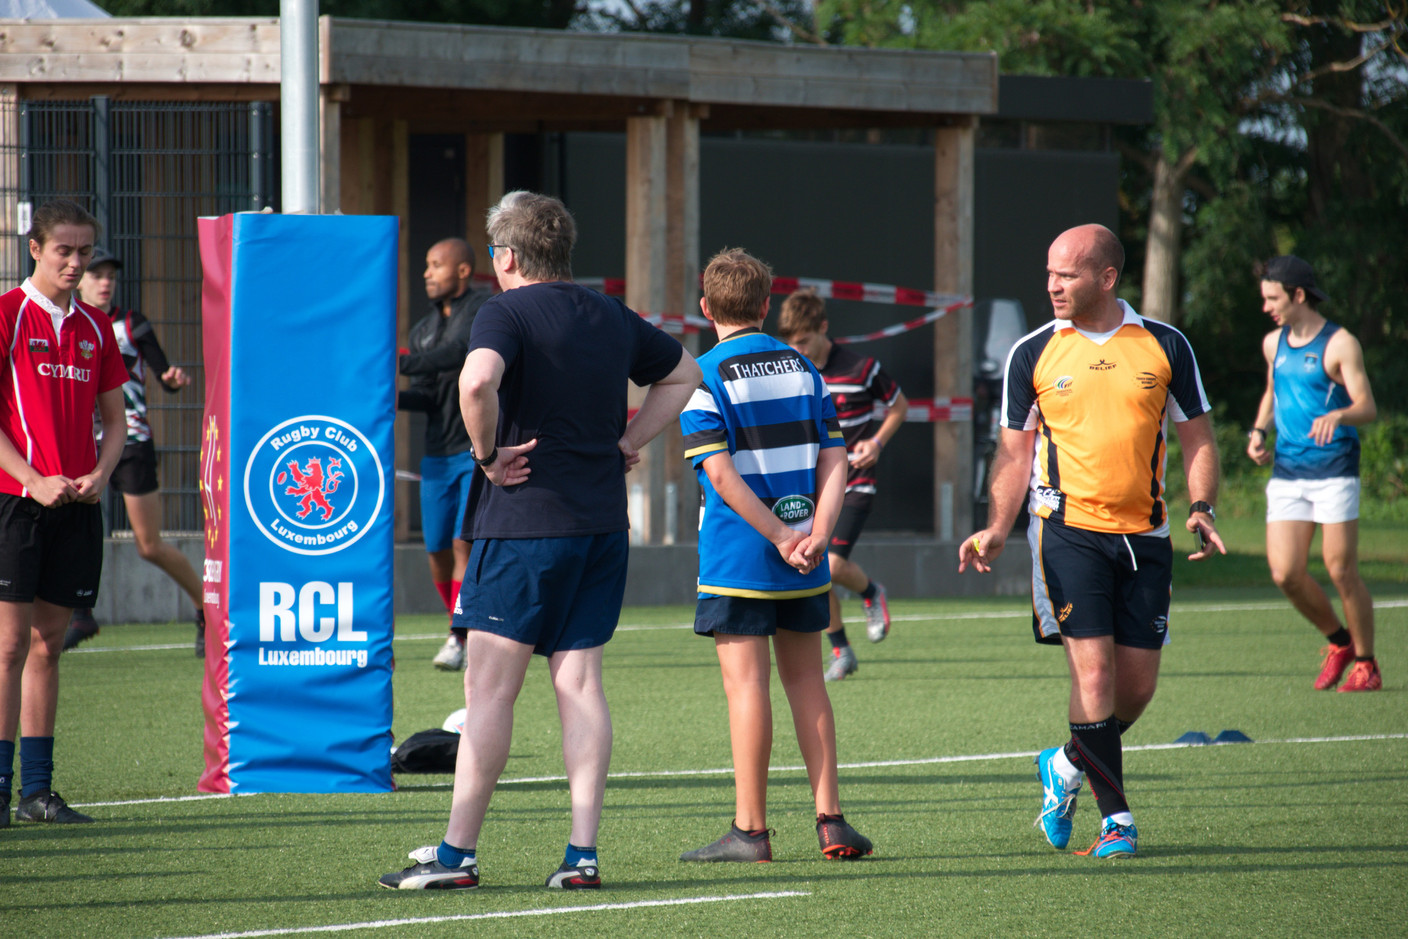 Touch is a non-contact form of rugby Photo: RCL Touch